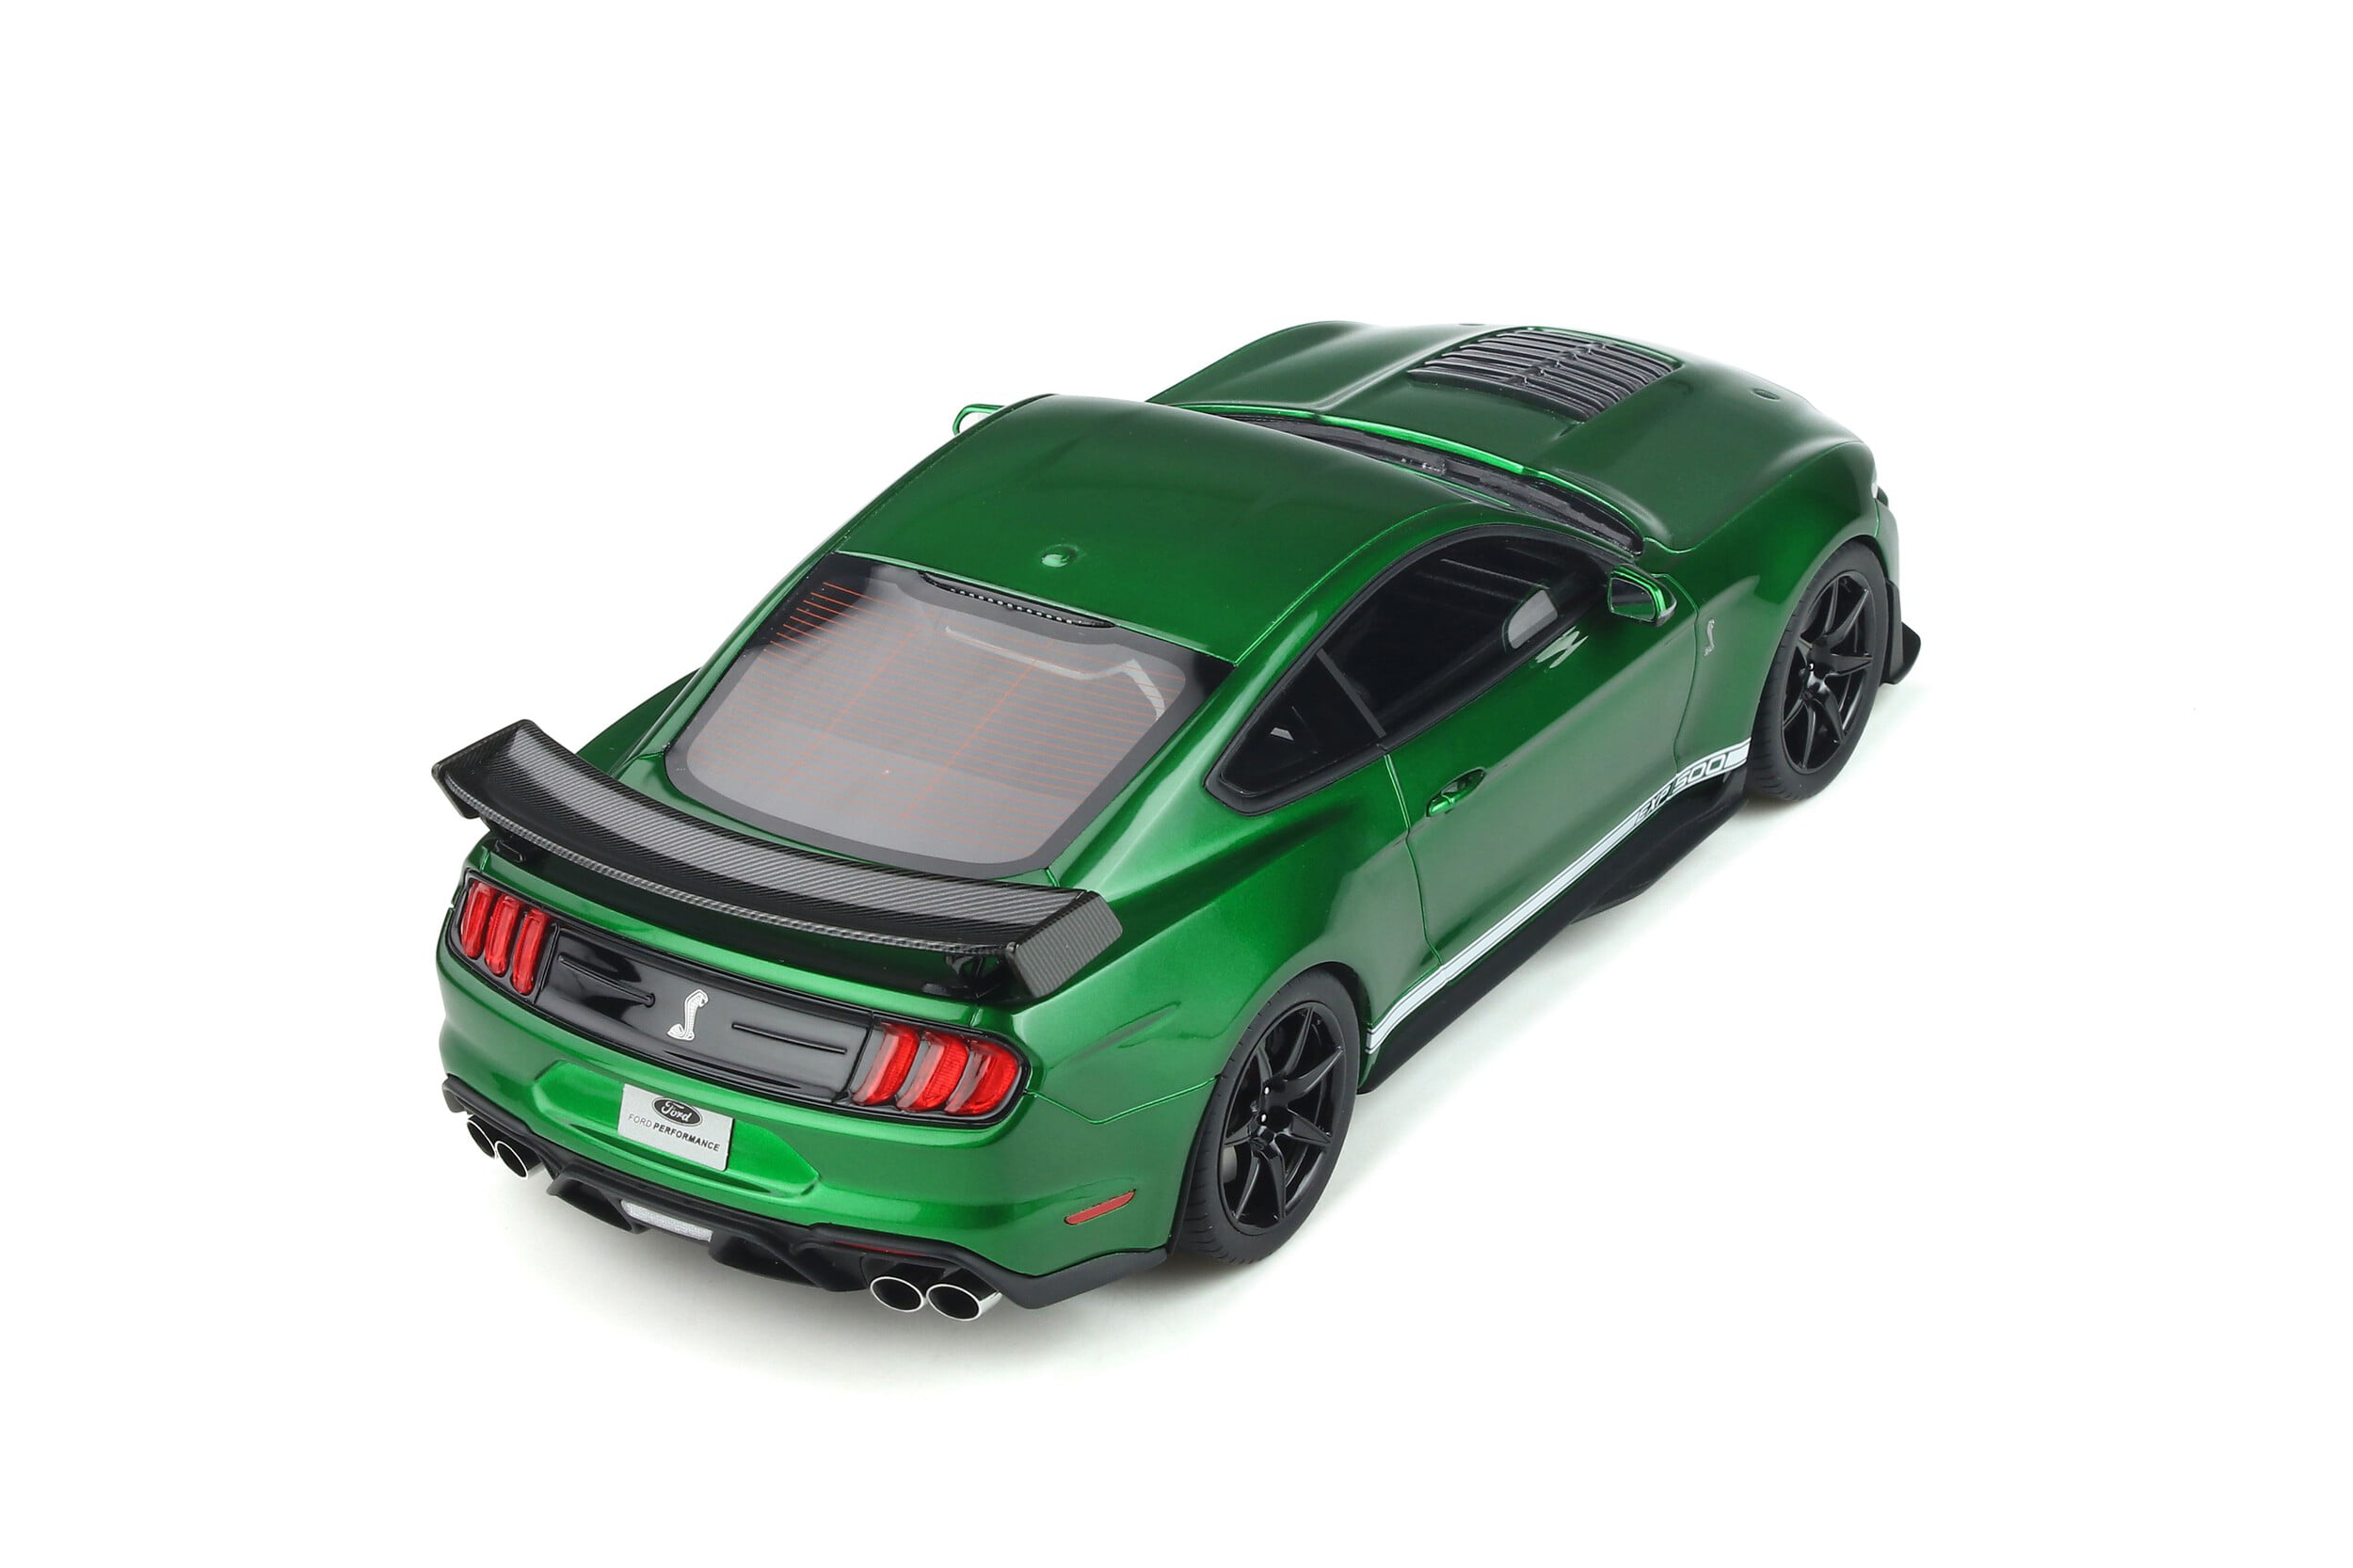 Ford mustang shelby gt500 année-modèle 2020 Candy-Apple-Green 1:18 gt834 GT Spirit 